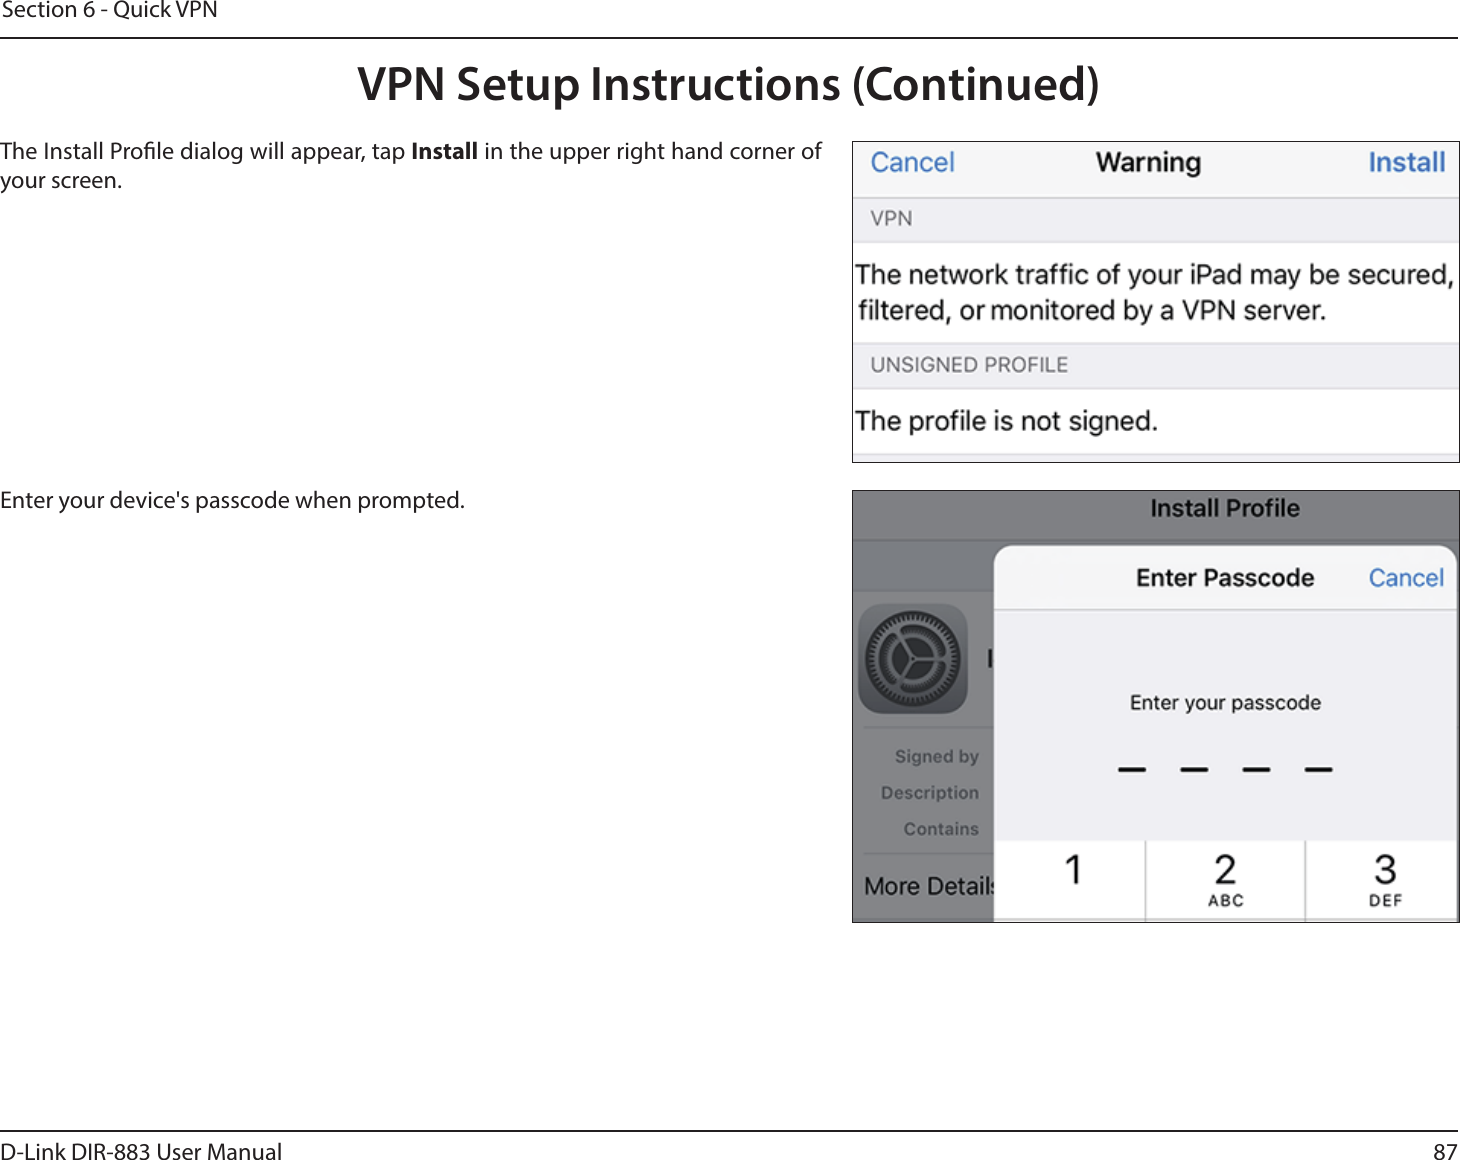 87D-Link DIR-883 User ManualSection 6 - Quick VPNThe Install Prole dialog will appear, tap Install in the upper right hand corner of your screen.Enter your device&apos;s passcode when prompted. VPN Setup Instructions (Continued)